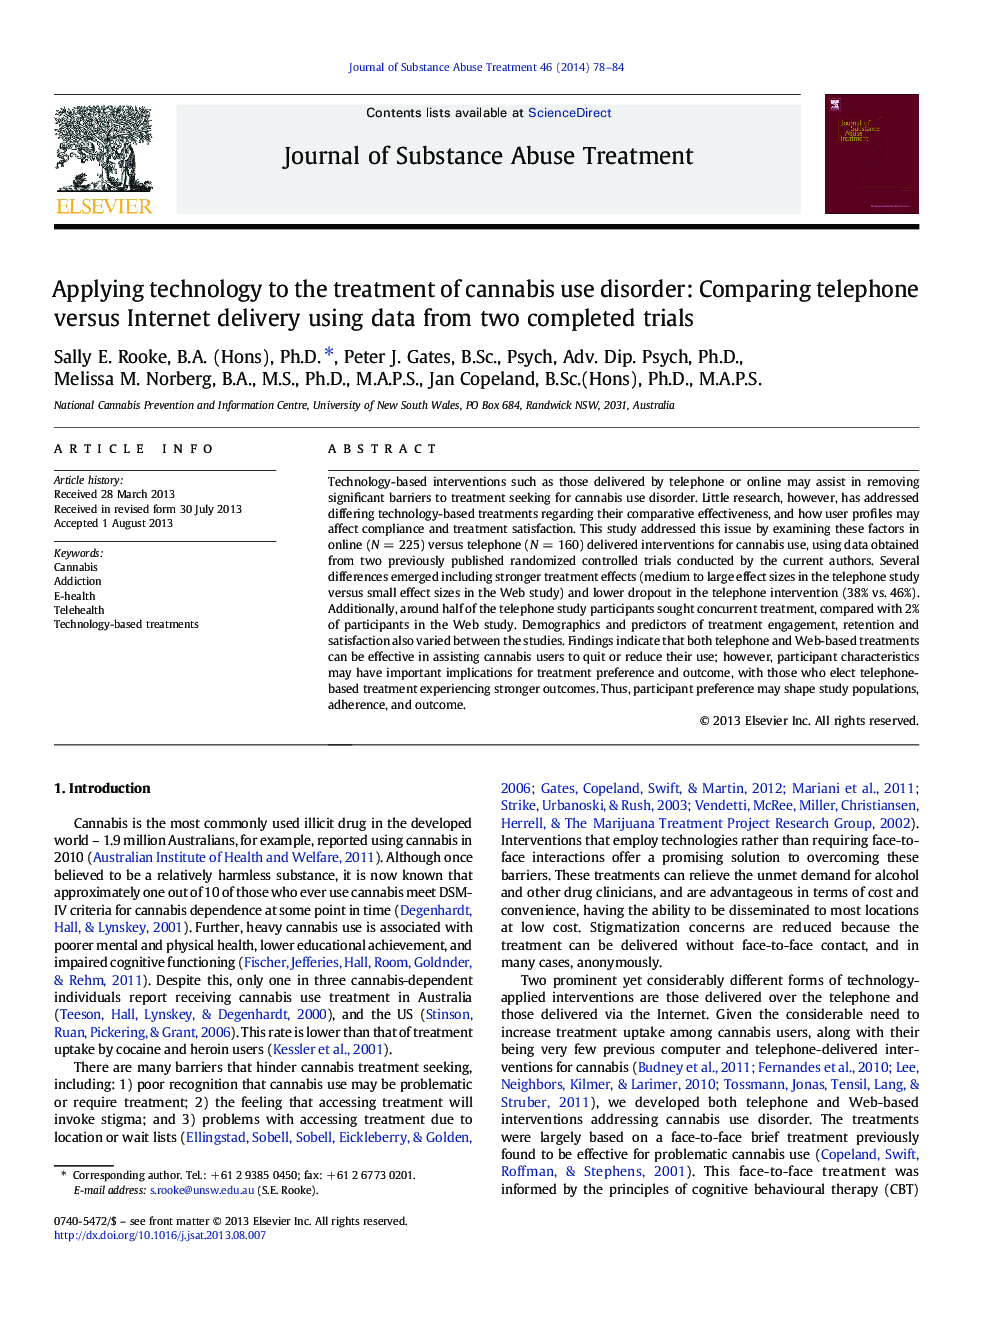 Applying technology to the treatment of cannabis use disorder: Comparing telephone versus Internet delivery using data from two completed trials